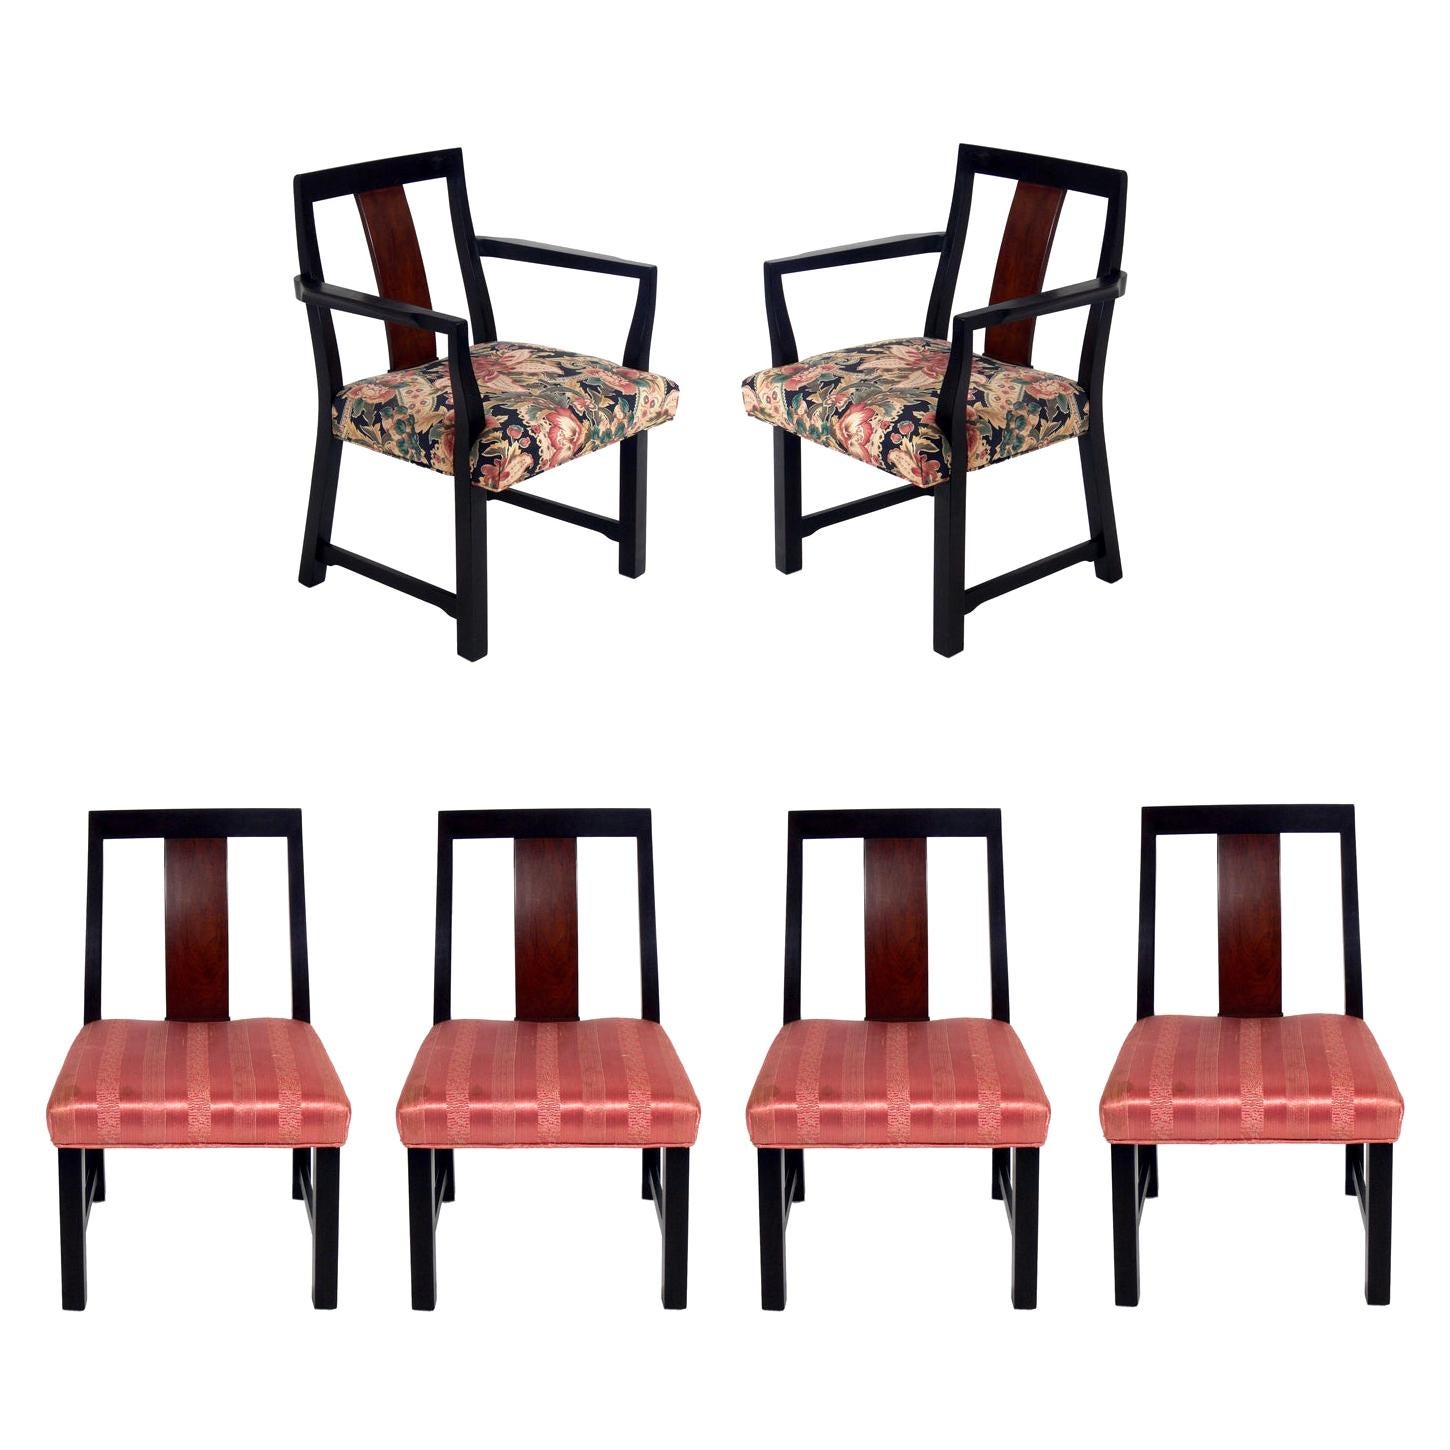 Dunbar Dining Chairs For Sale